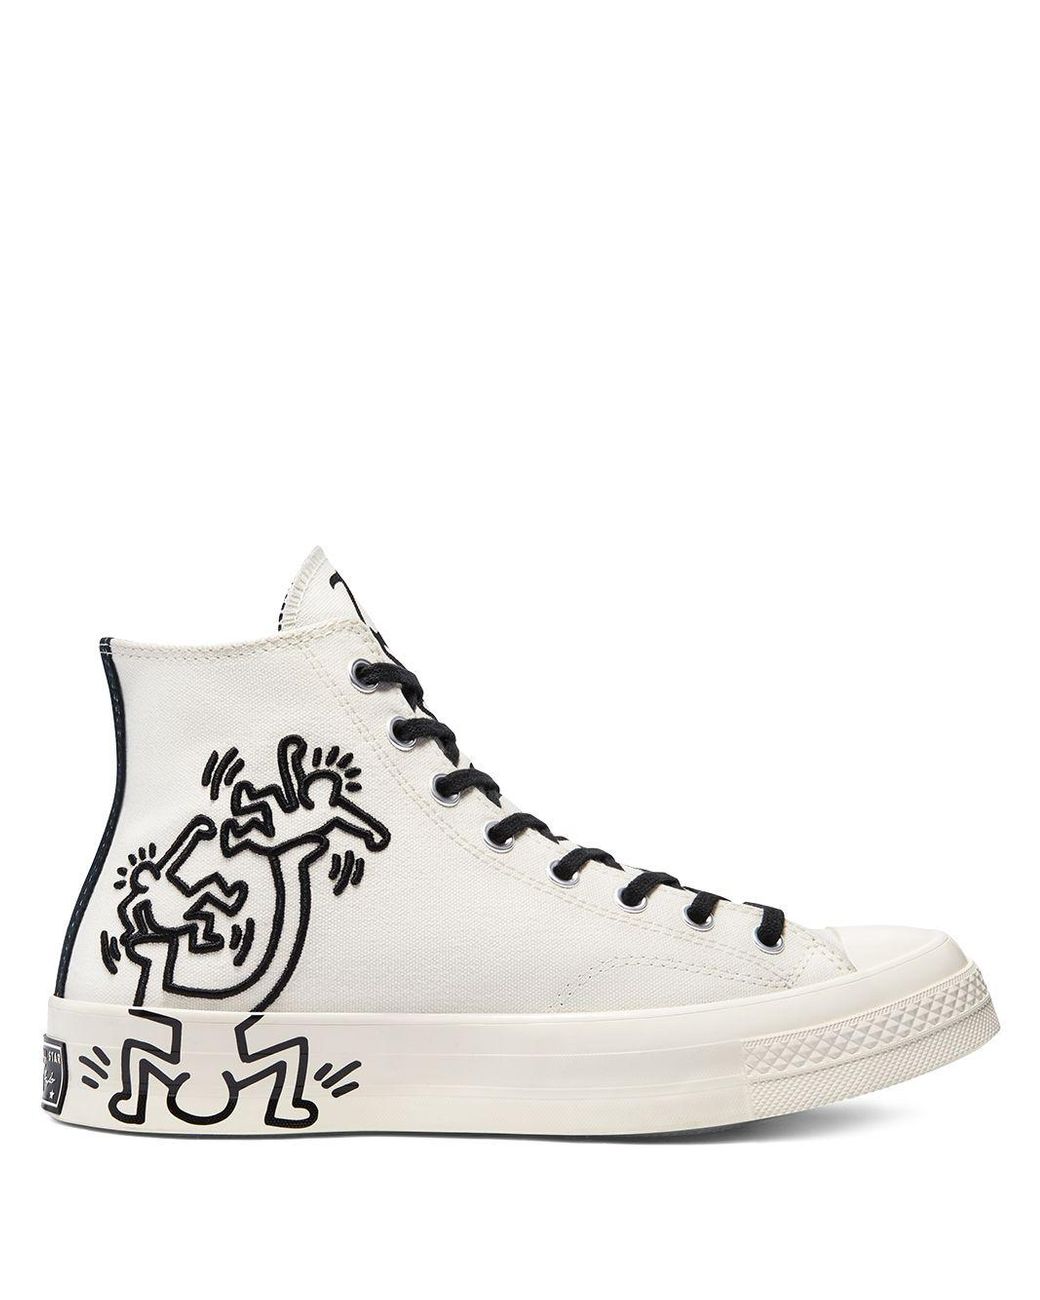 Converse X Keith Haring Chuck 70 High Top Sneakers | Lyst